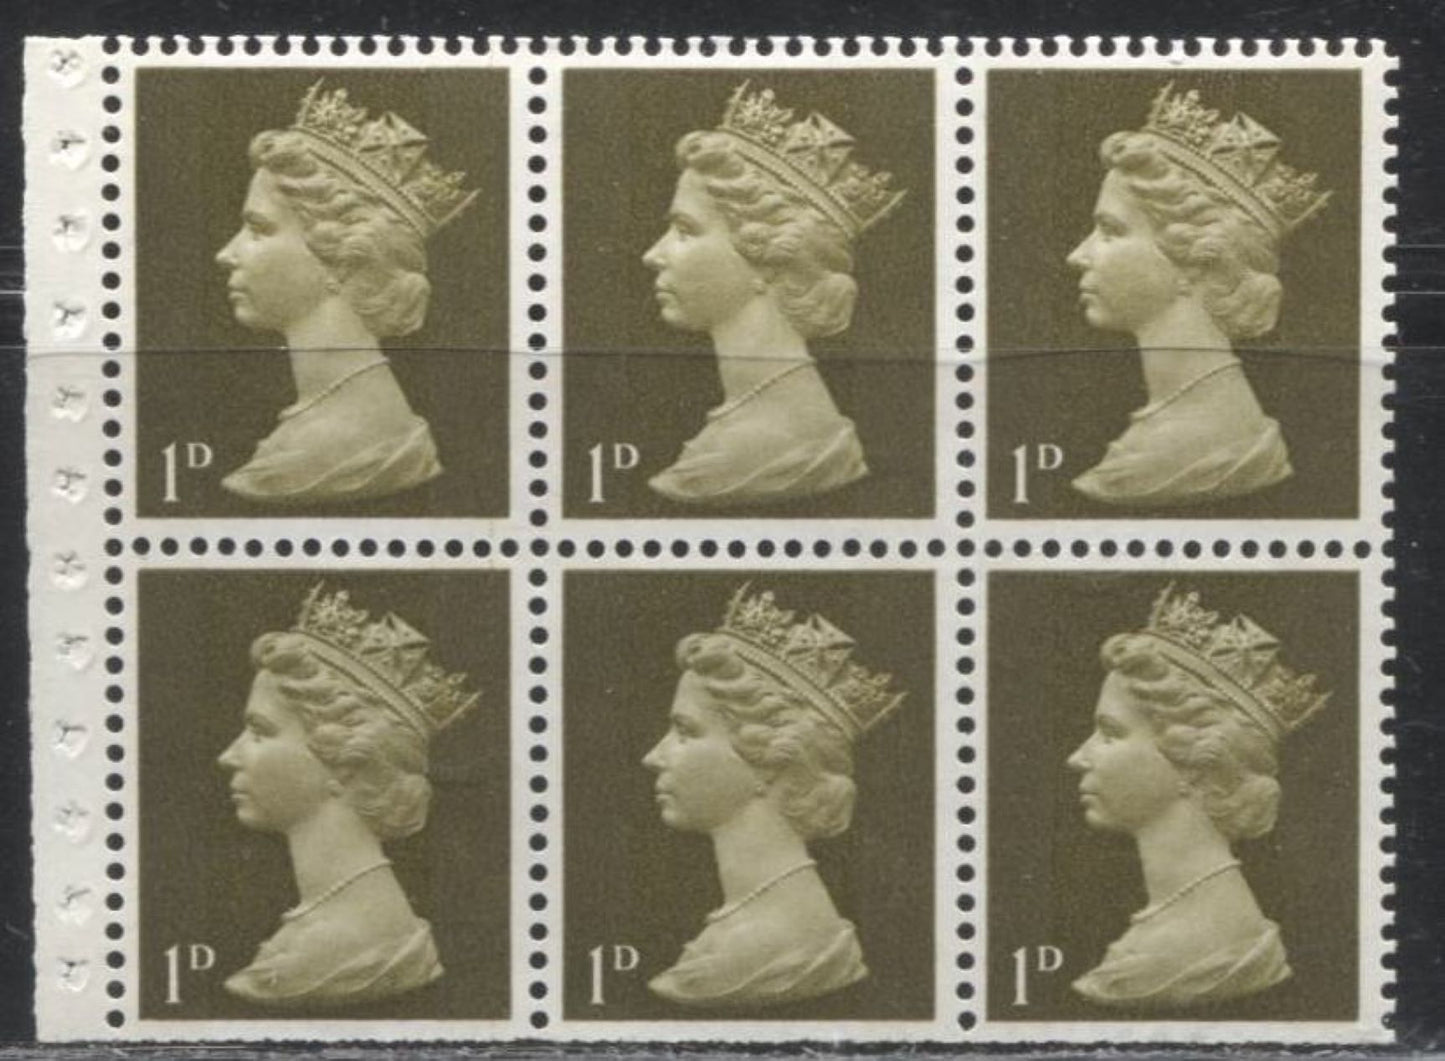 Great Britain SG#LP50 4/6d- Black on Grey Blue 1967-1971 Pre-Decimal Machin Heads Issue, A Complete Booklet From March 1969, Various Fluorescence Levels For Interleaving Pages (Combination A), Medium Fluorescent "Sirius" Cover